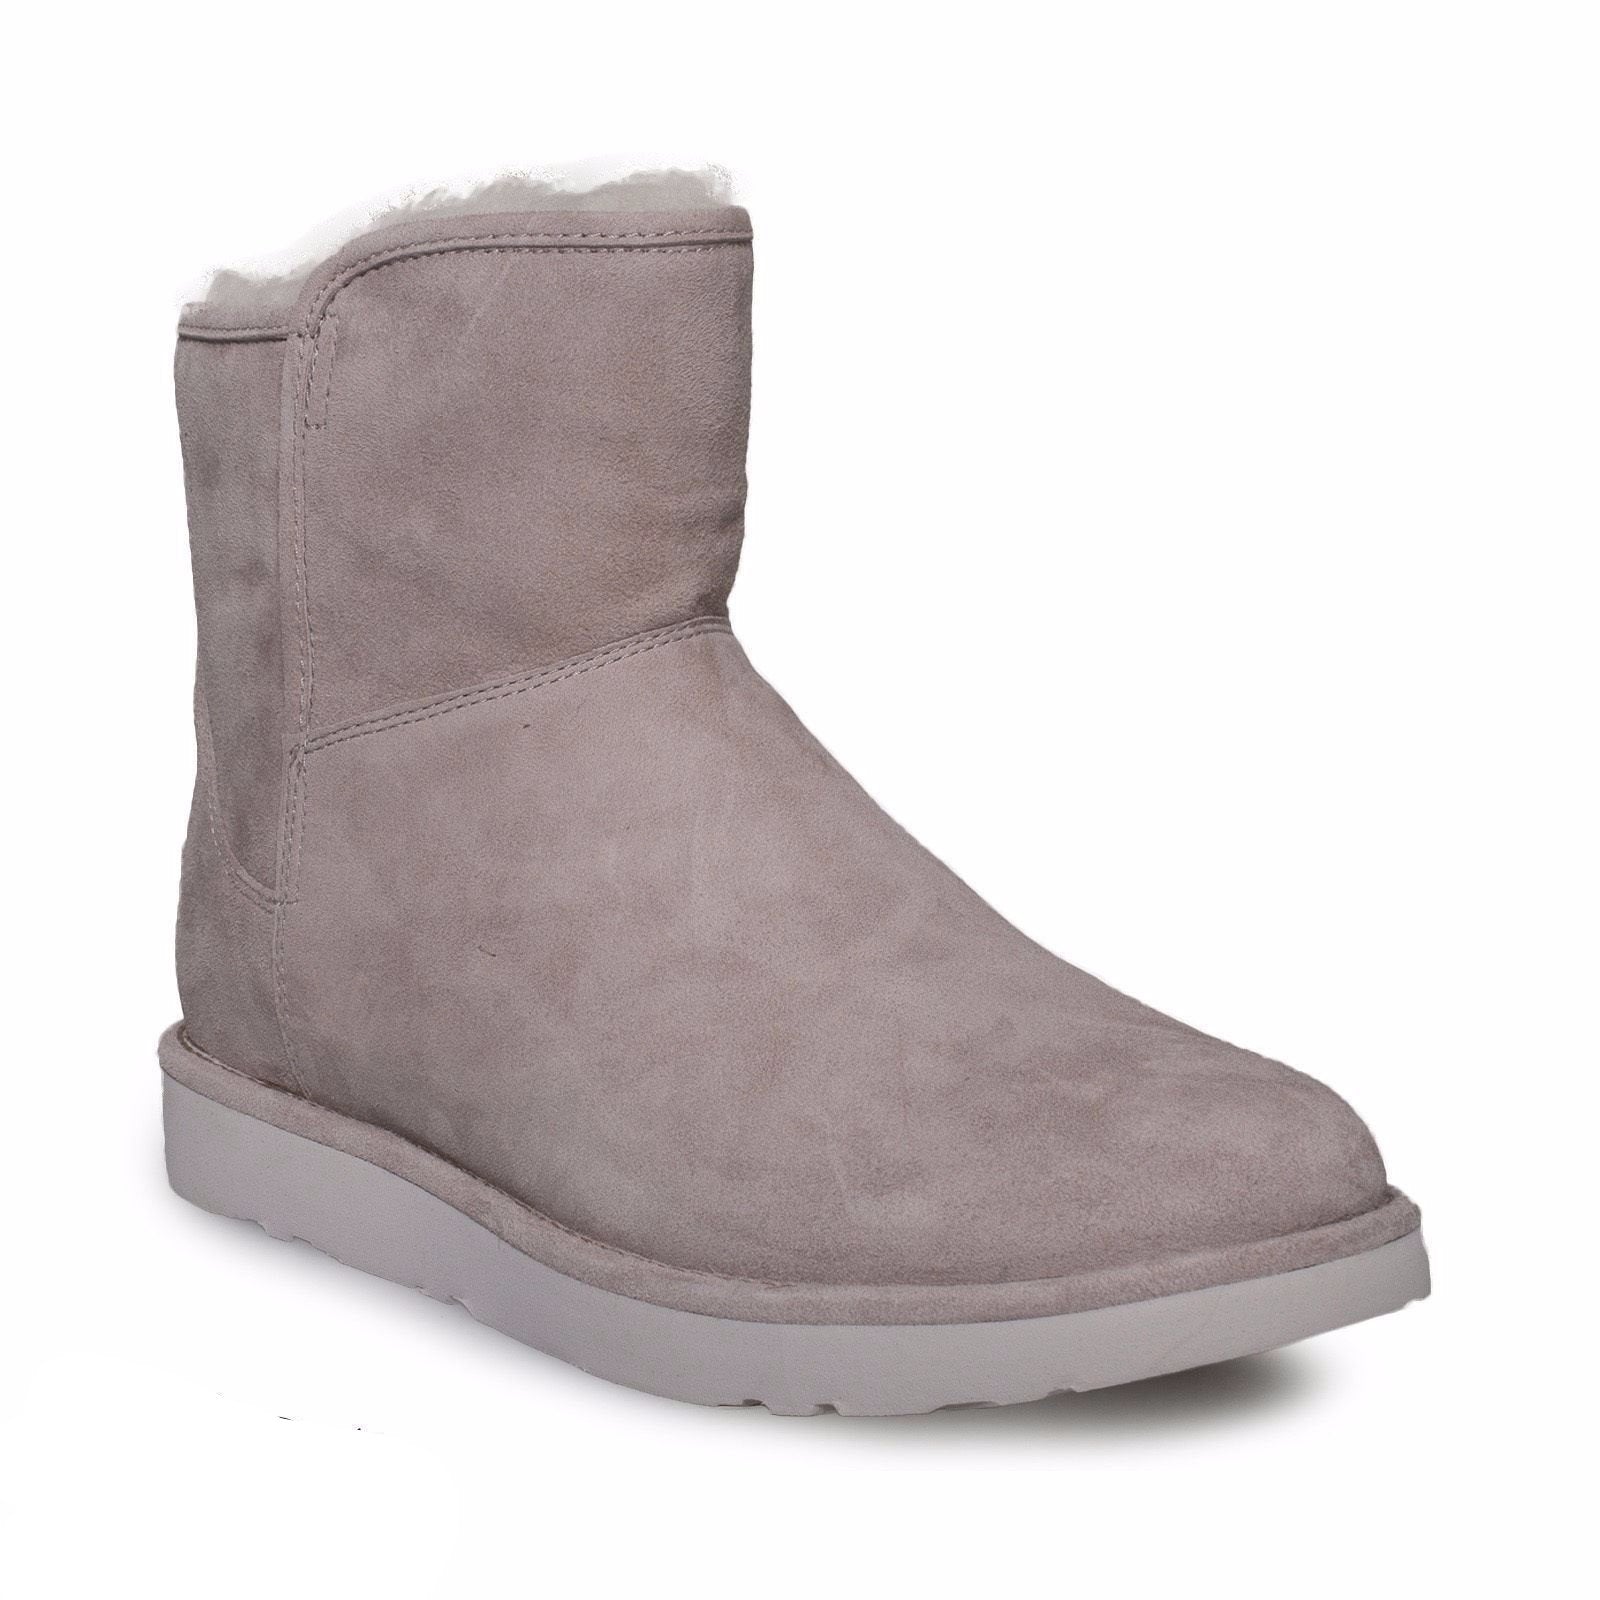 Ugg Abree Women's Mini leather Boots